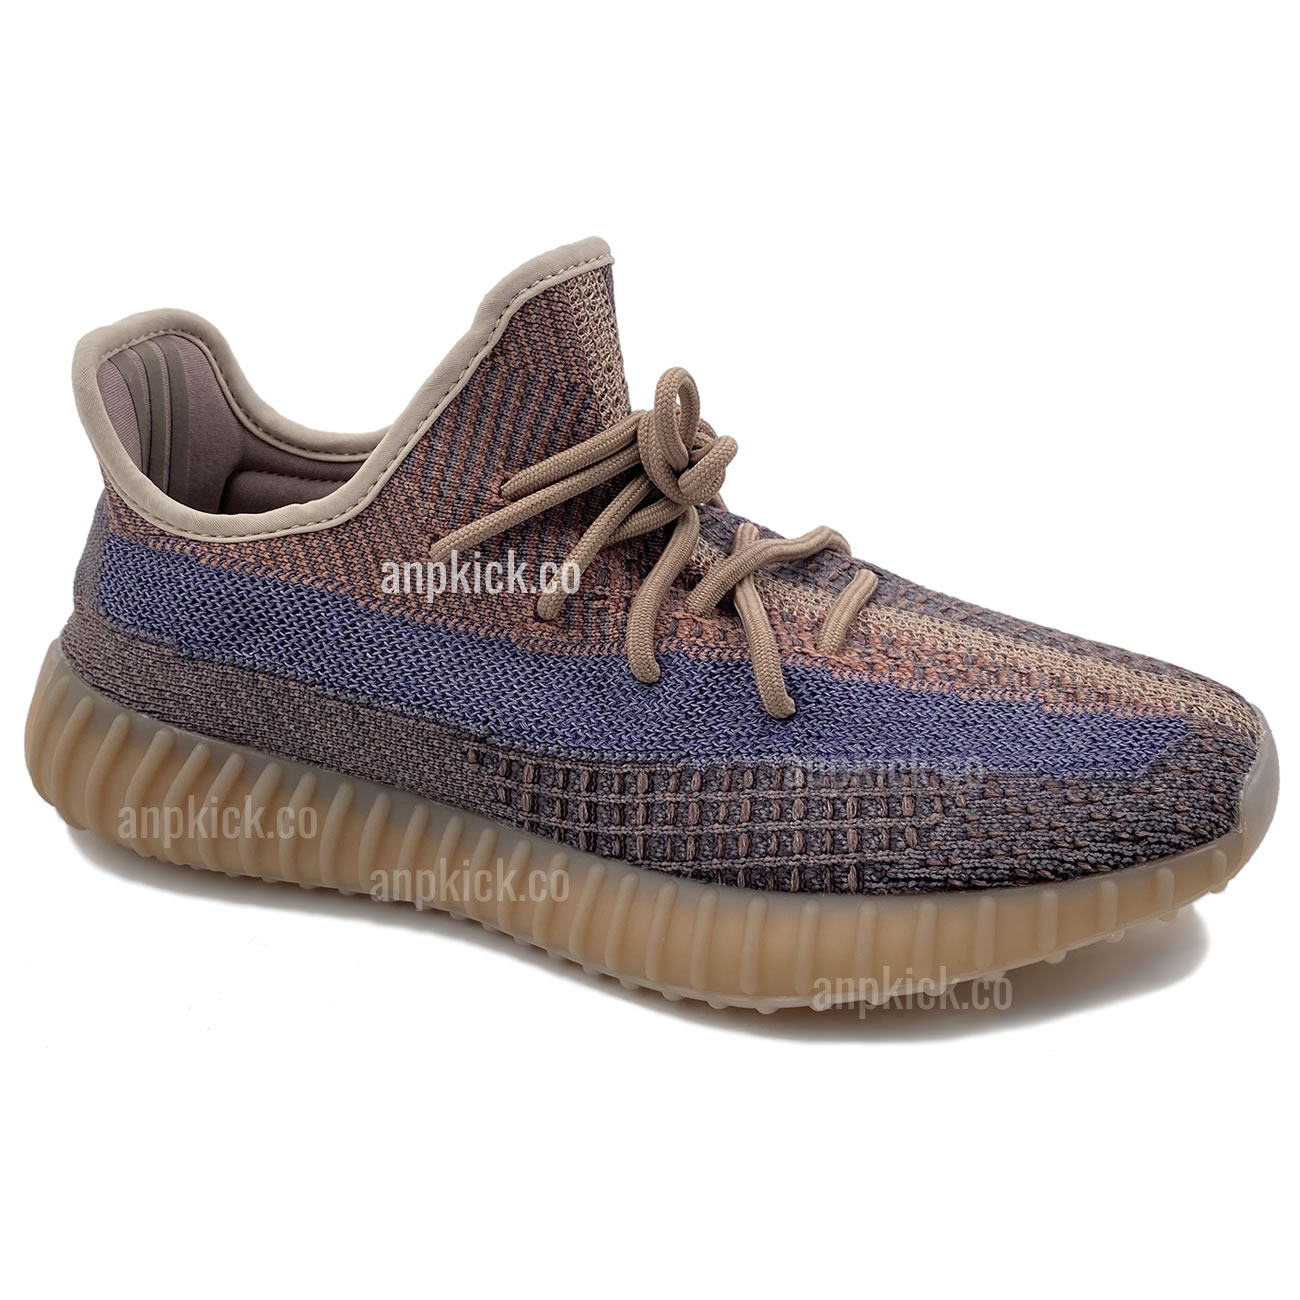 Adidas Yeezy Boost 350 V2 Yecher Ho2795 New Release Date First Look (4) - newkick.org